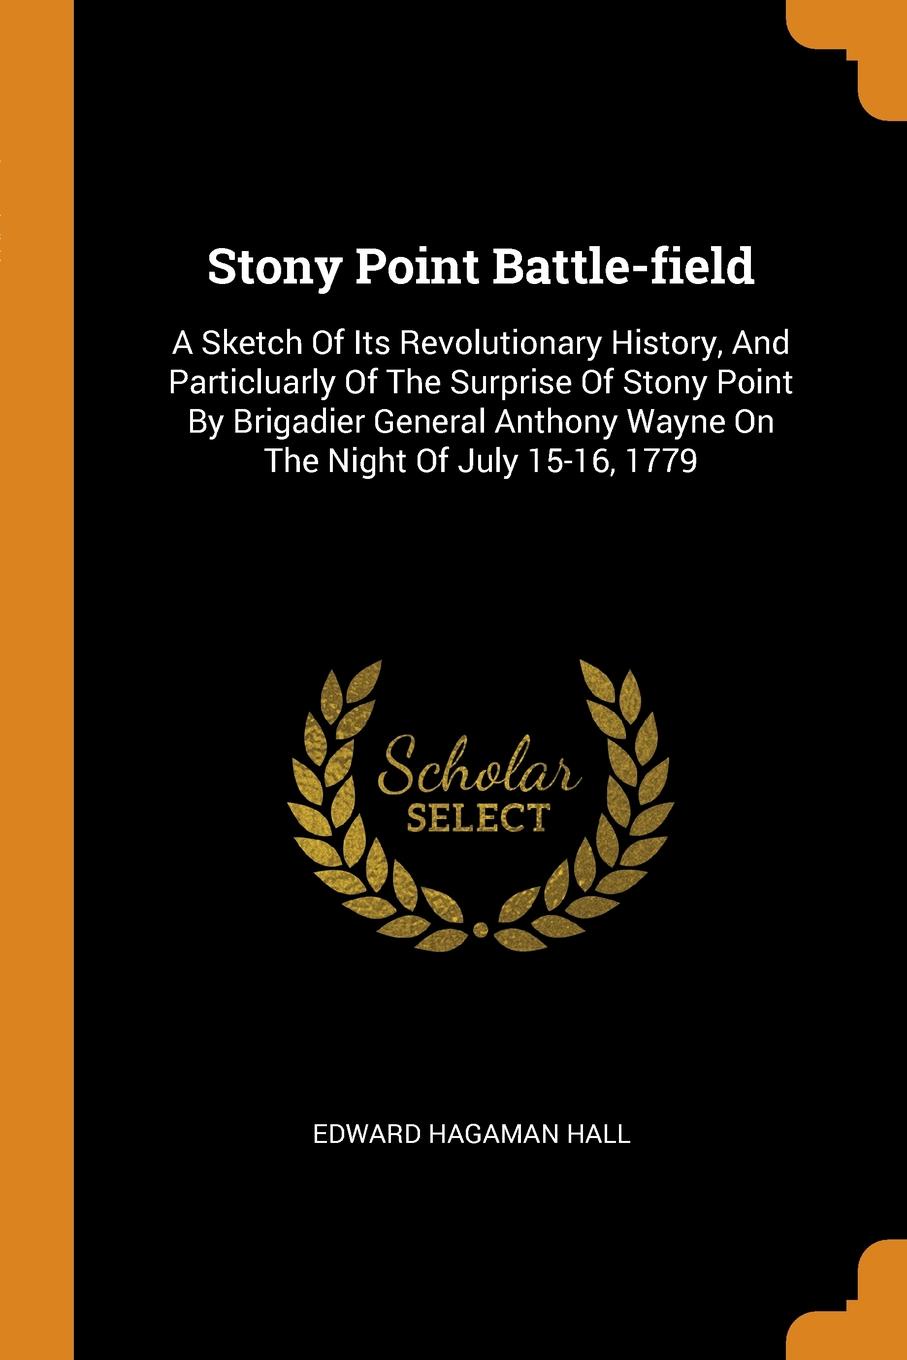 Stony Point Battle-field. A Sketch Of Its Revolutionary History, And Particluarly Of The Surprise Of Stony Point By Brigadier General Anthony Wayne On The Night Of July 15-16, 1779